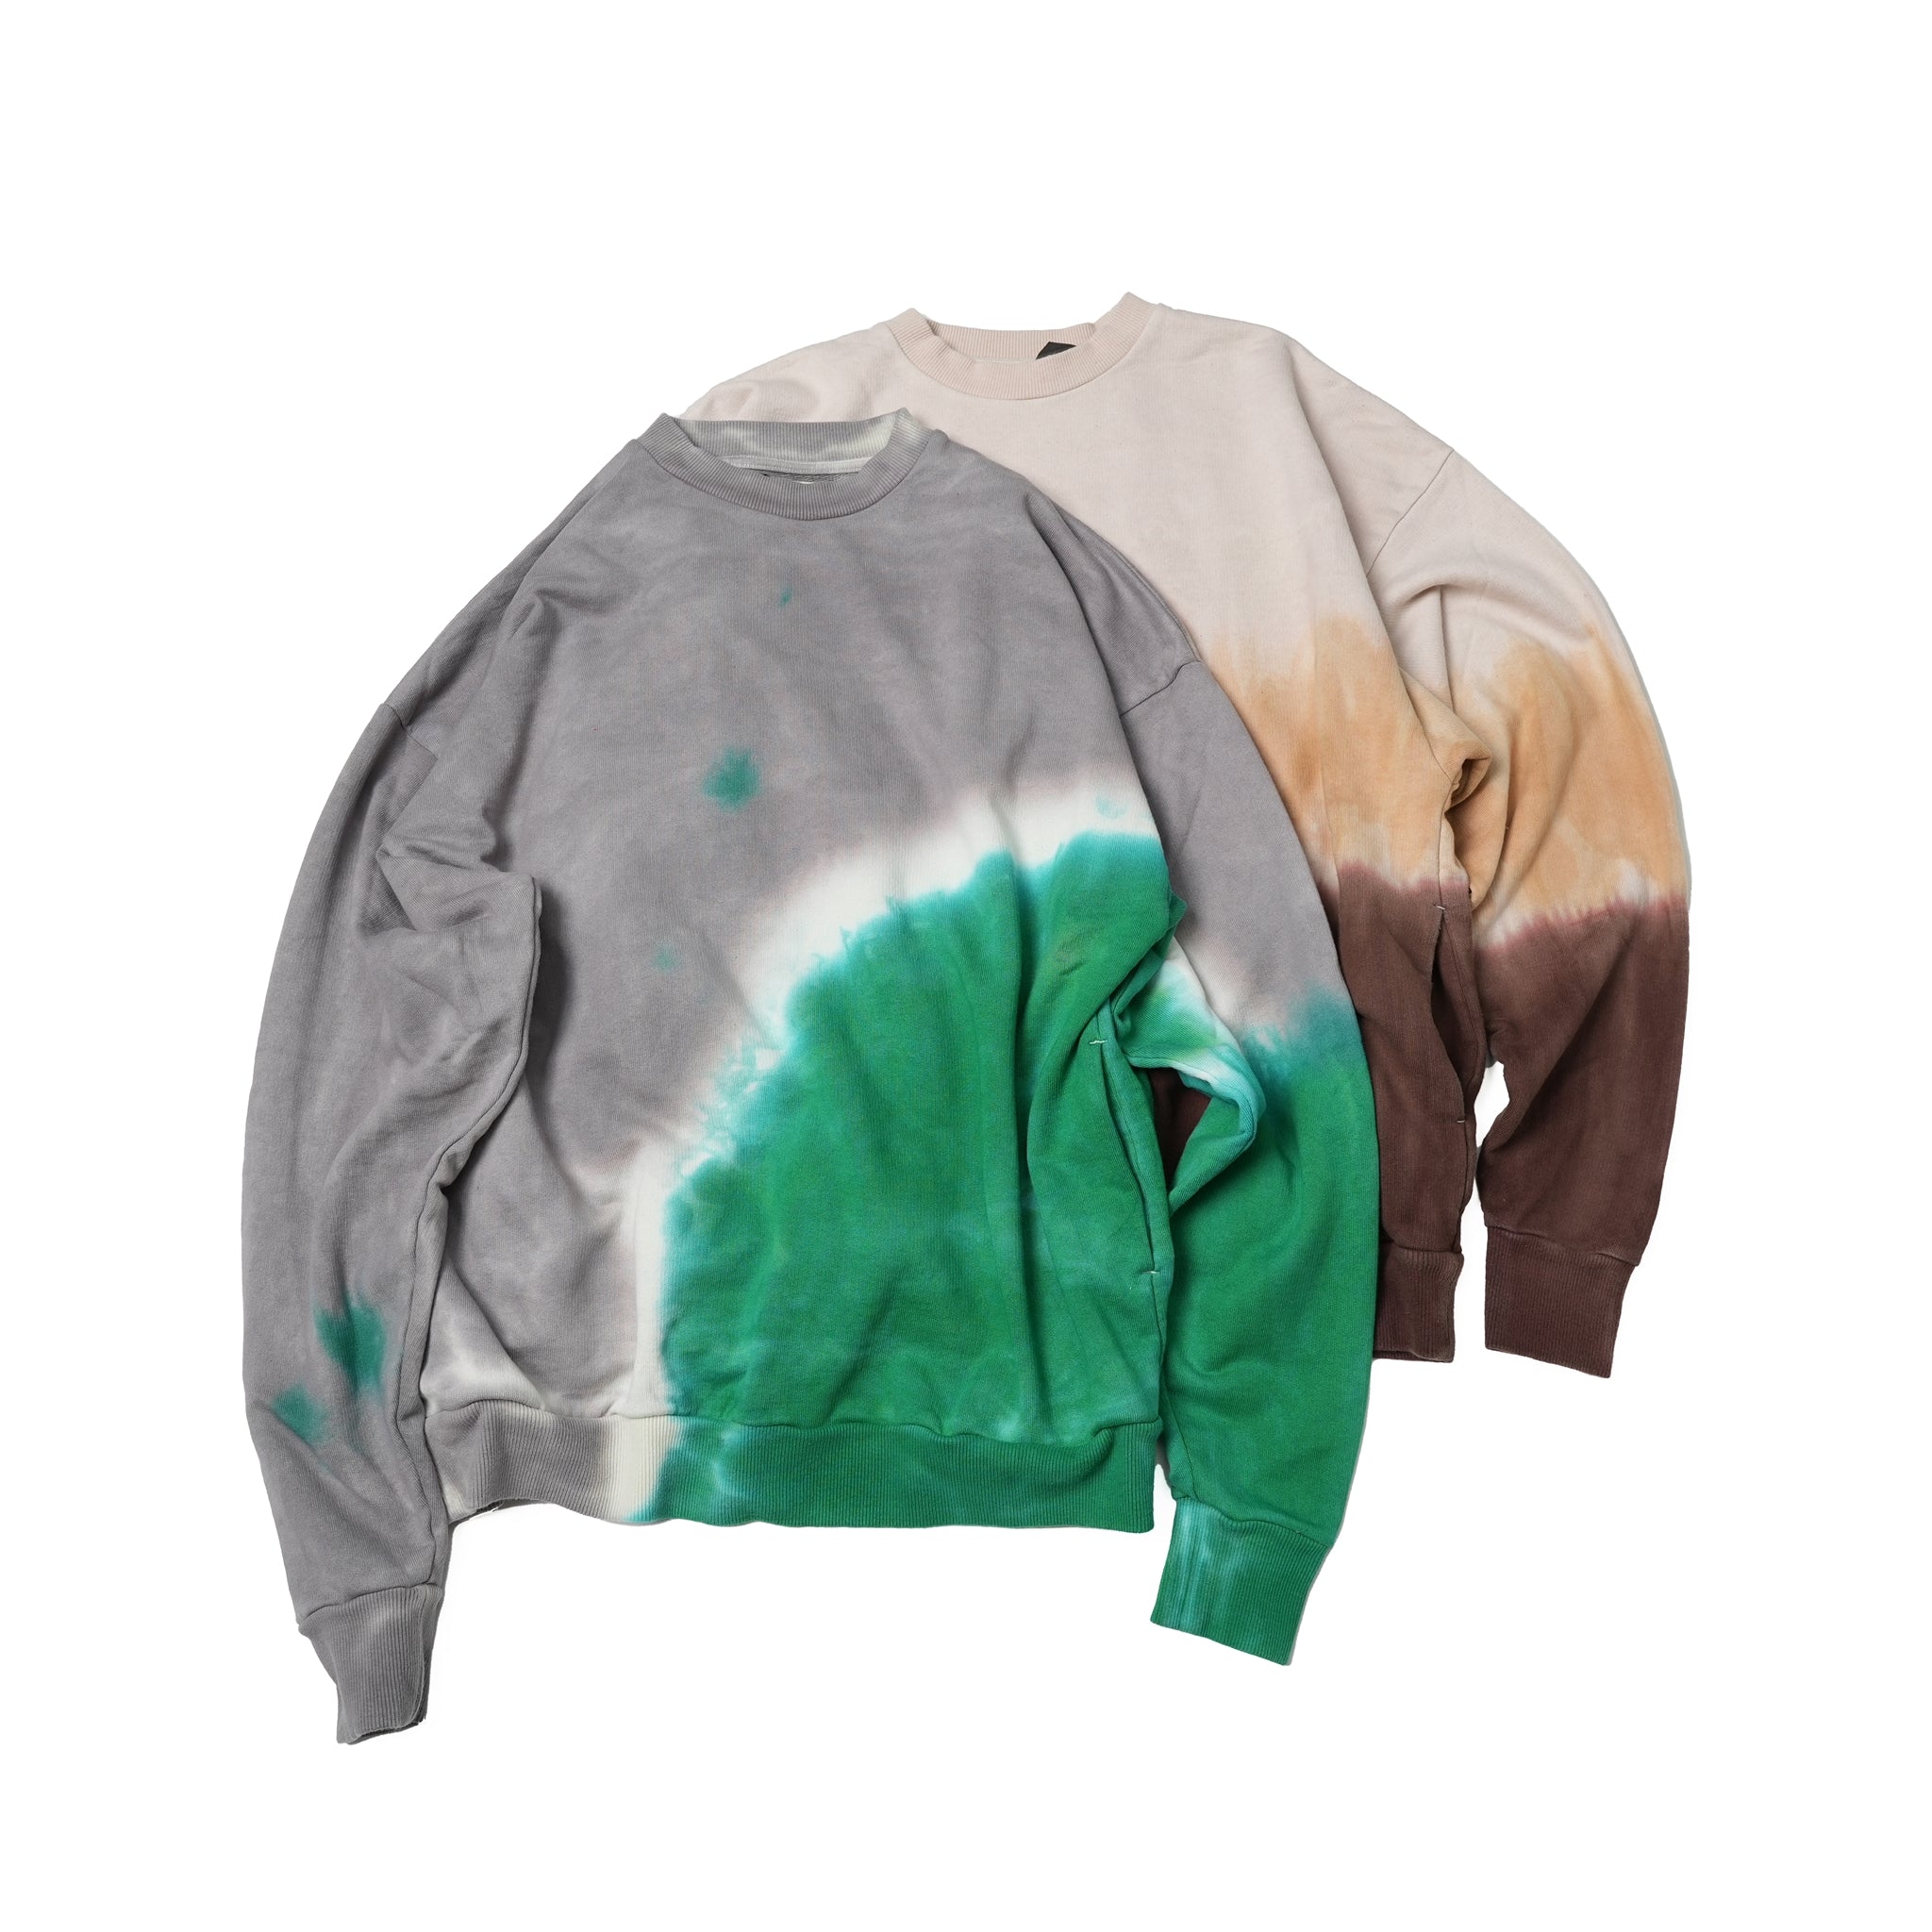 Name:Tiedye Pile Pullover | Color:Mix/Coffee【AMBERGLEAM_アンバーグリーム】| No:1143131111